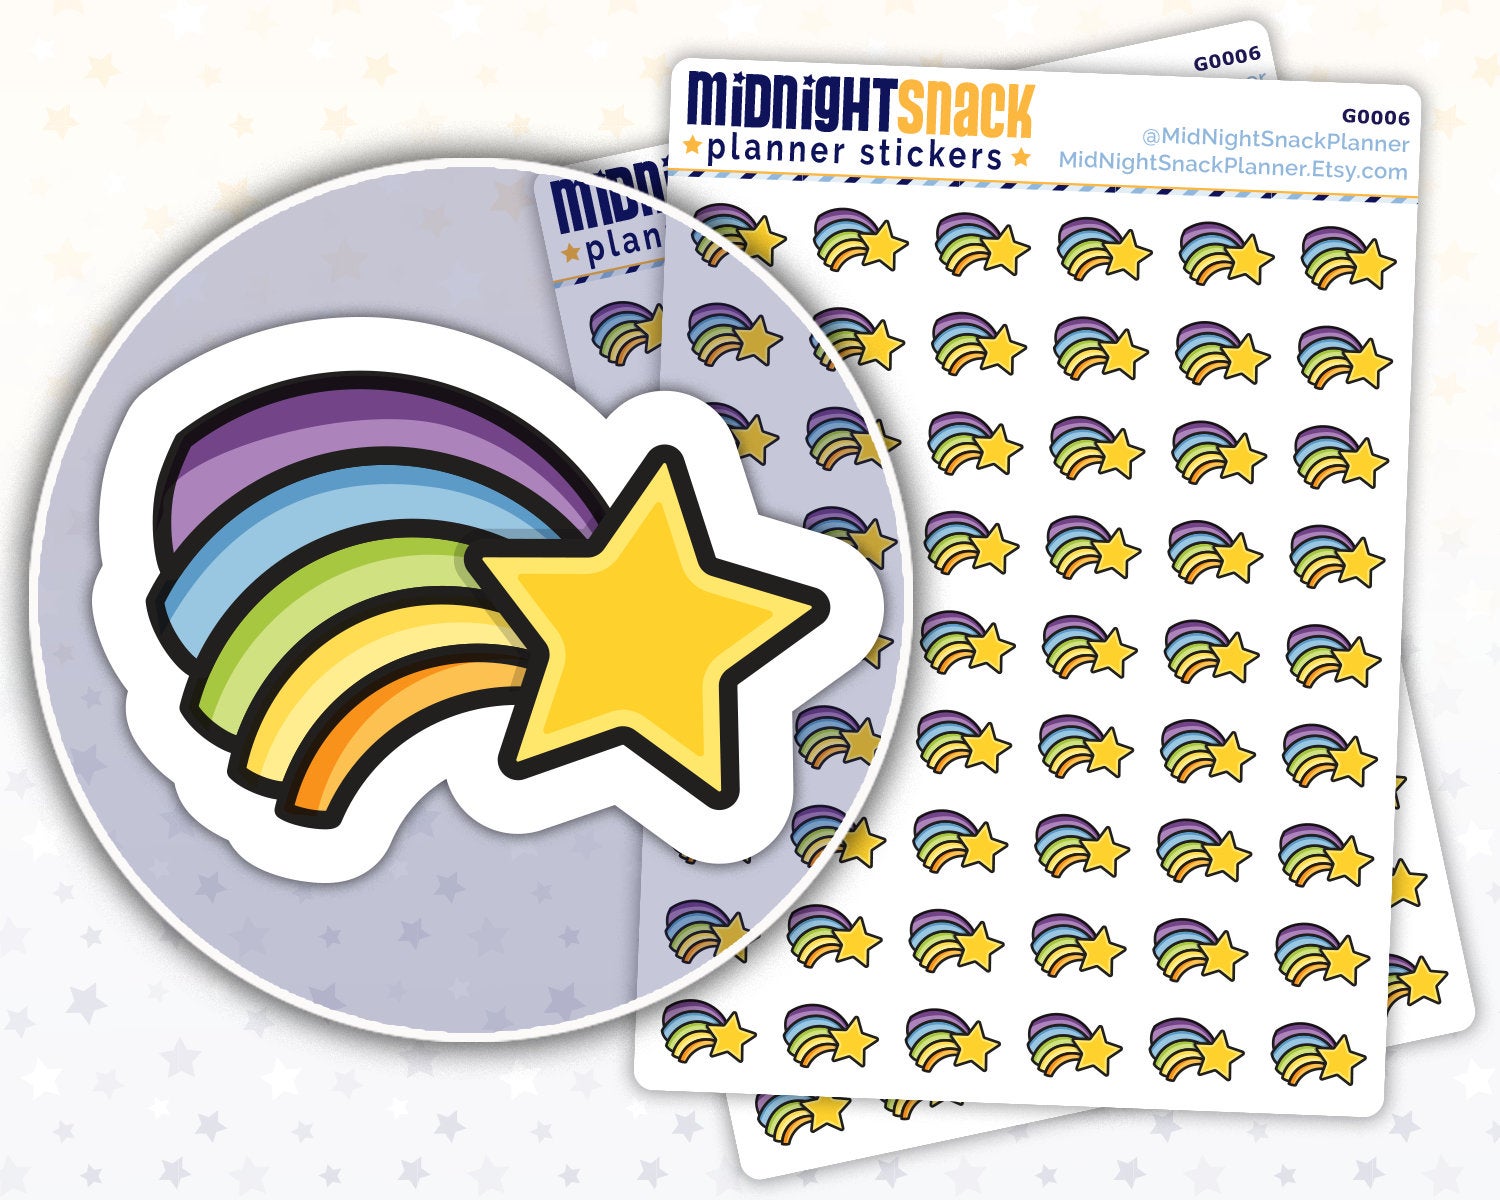 Shooting Star Icon: Goal Planning Planner Stickers Midnight Snack Planner